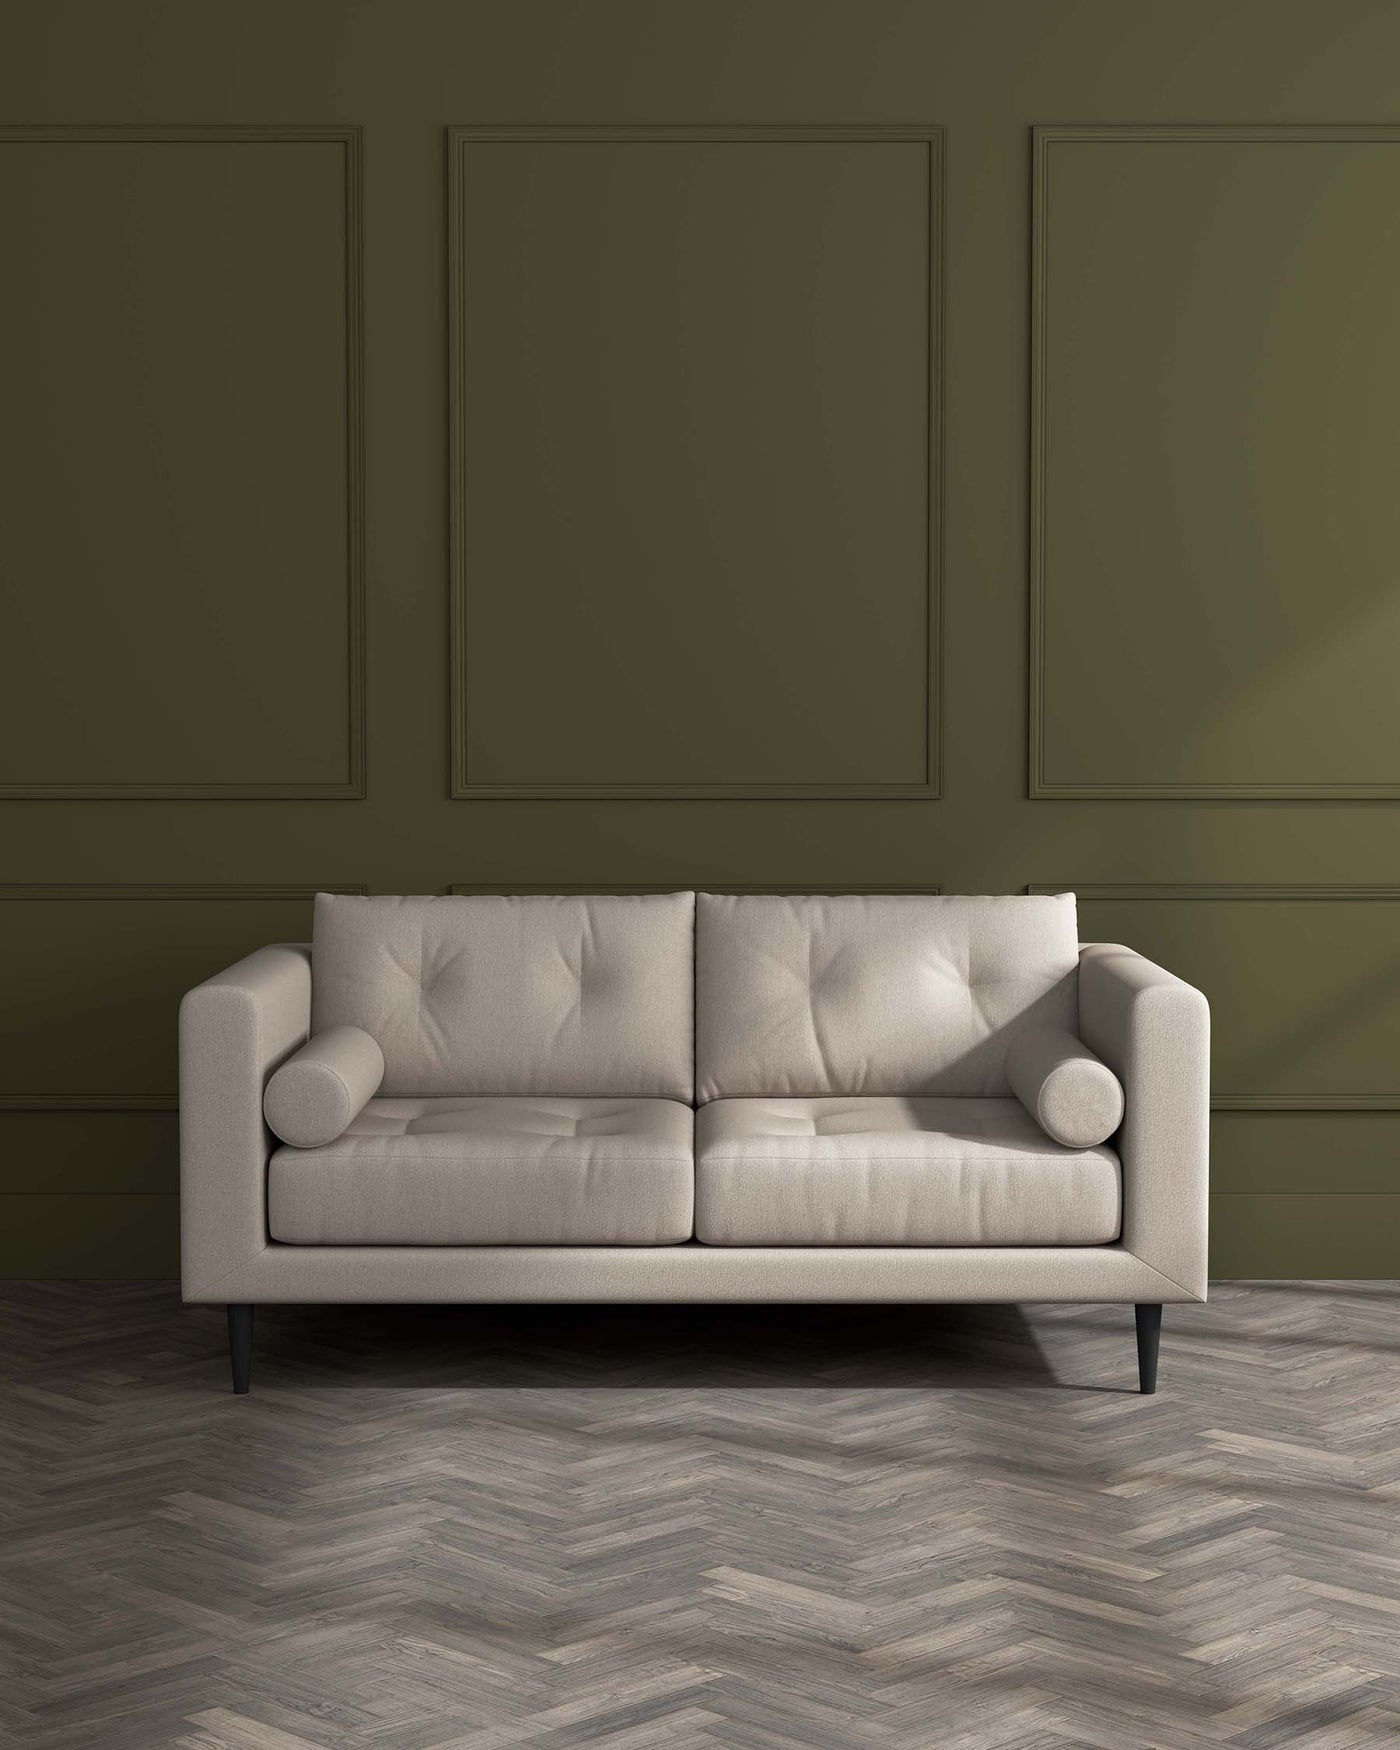 A modern three-seater sofa in a light beige fabric with tufted backrest, clean lines, cylindrical armrest cushions, and tapered black legs, set against a dark olive green wall with decorative moulding and herringbone-patterned wooden flooring.